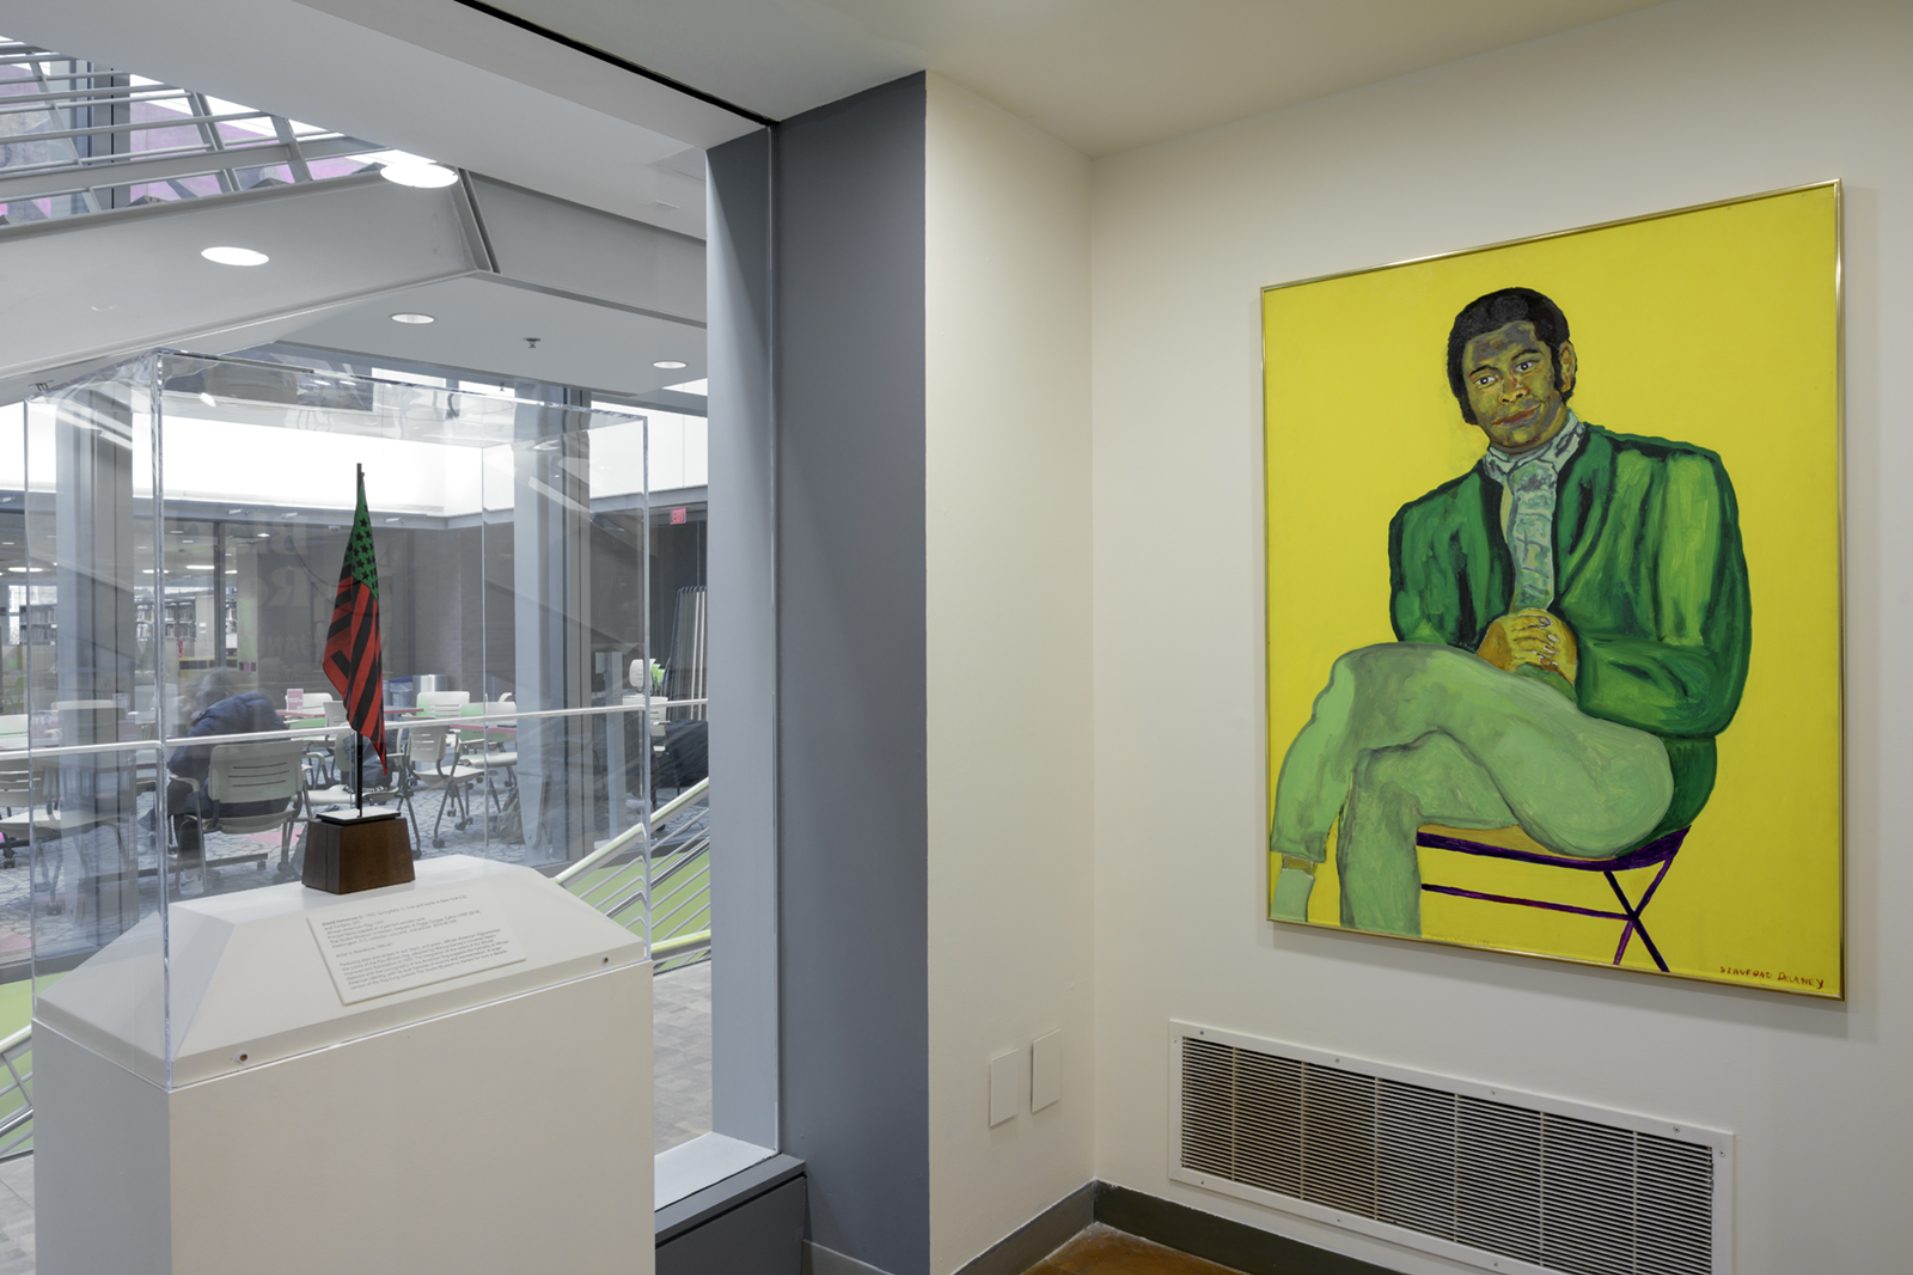 On view in an SCMA gallery next to tall windows to the atrium: left; a small American flag in red, dark blue, and bright green; right: a Black man dressed in all green and seated, legs crossed, on a folding chair on a vibrant yellow background; signed Beauford Delaney in small red block letters at the bottom right.